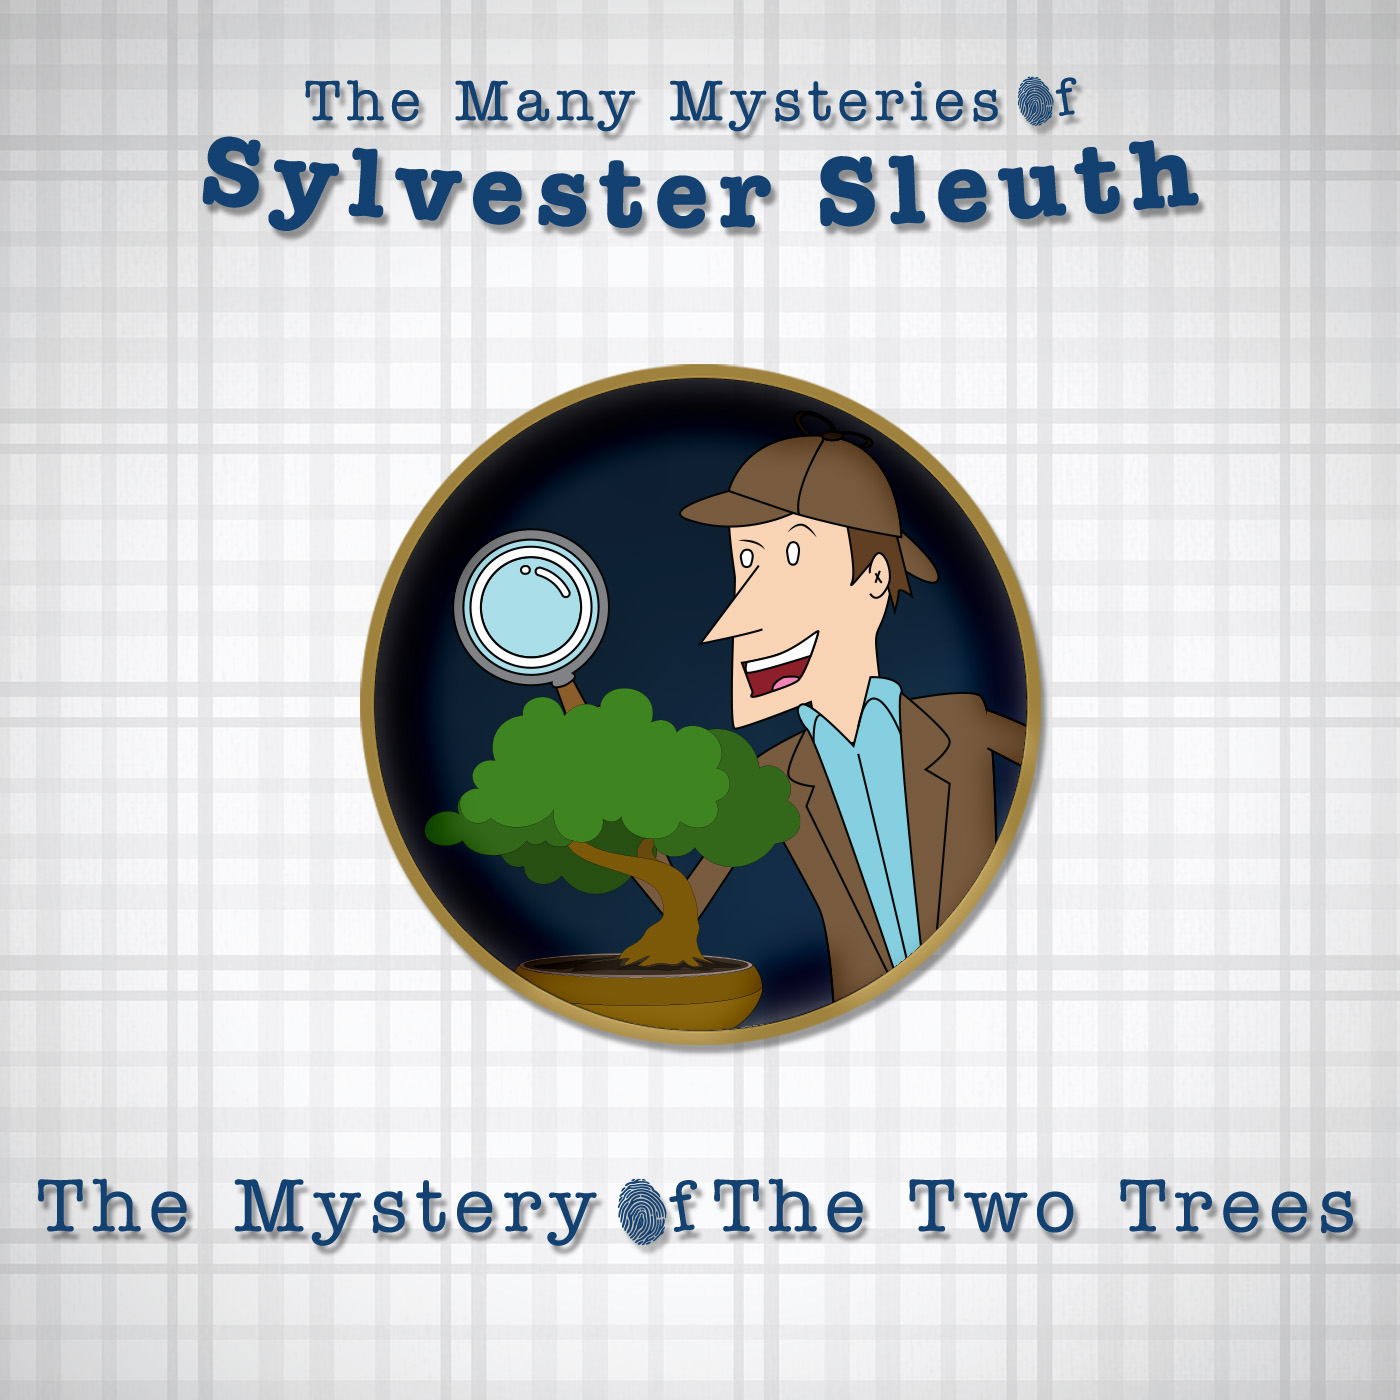 Sylvester Sleuth and the Mystery of the Two Trees